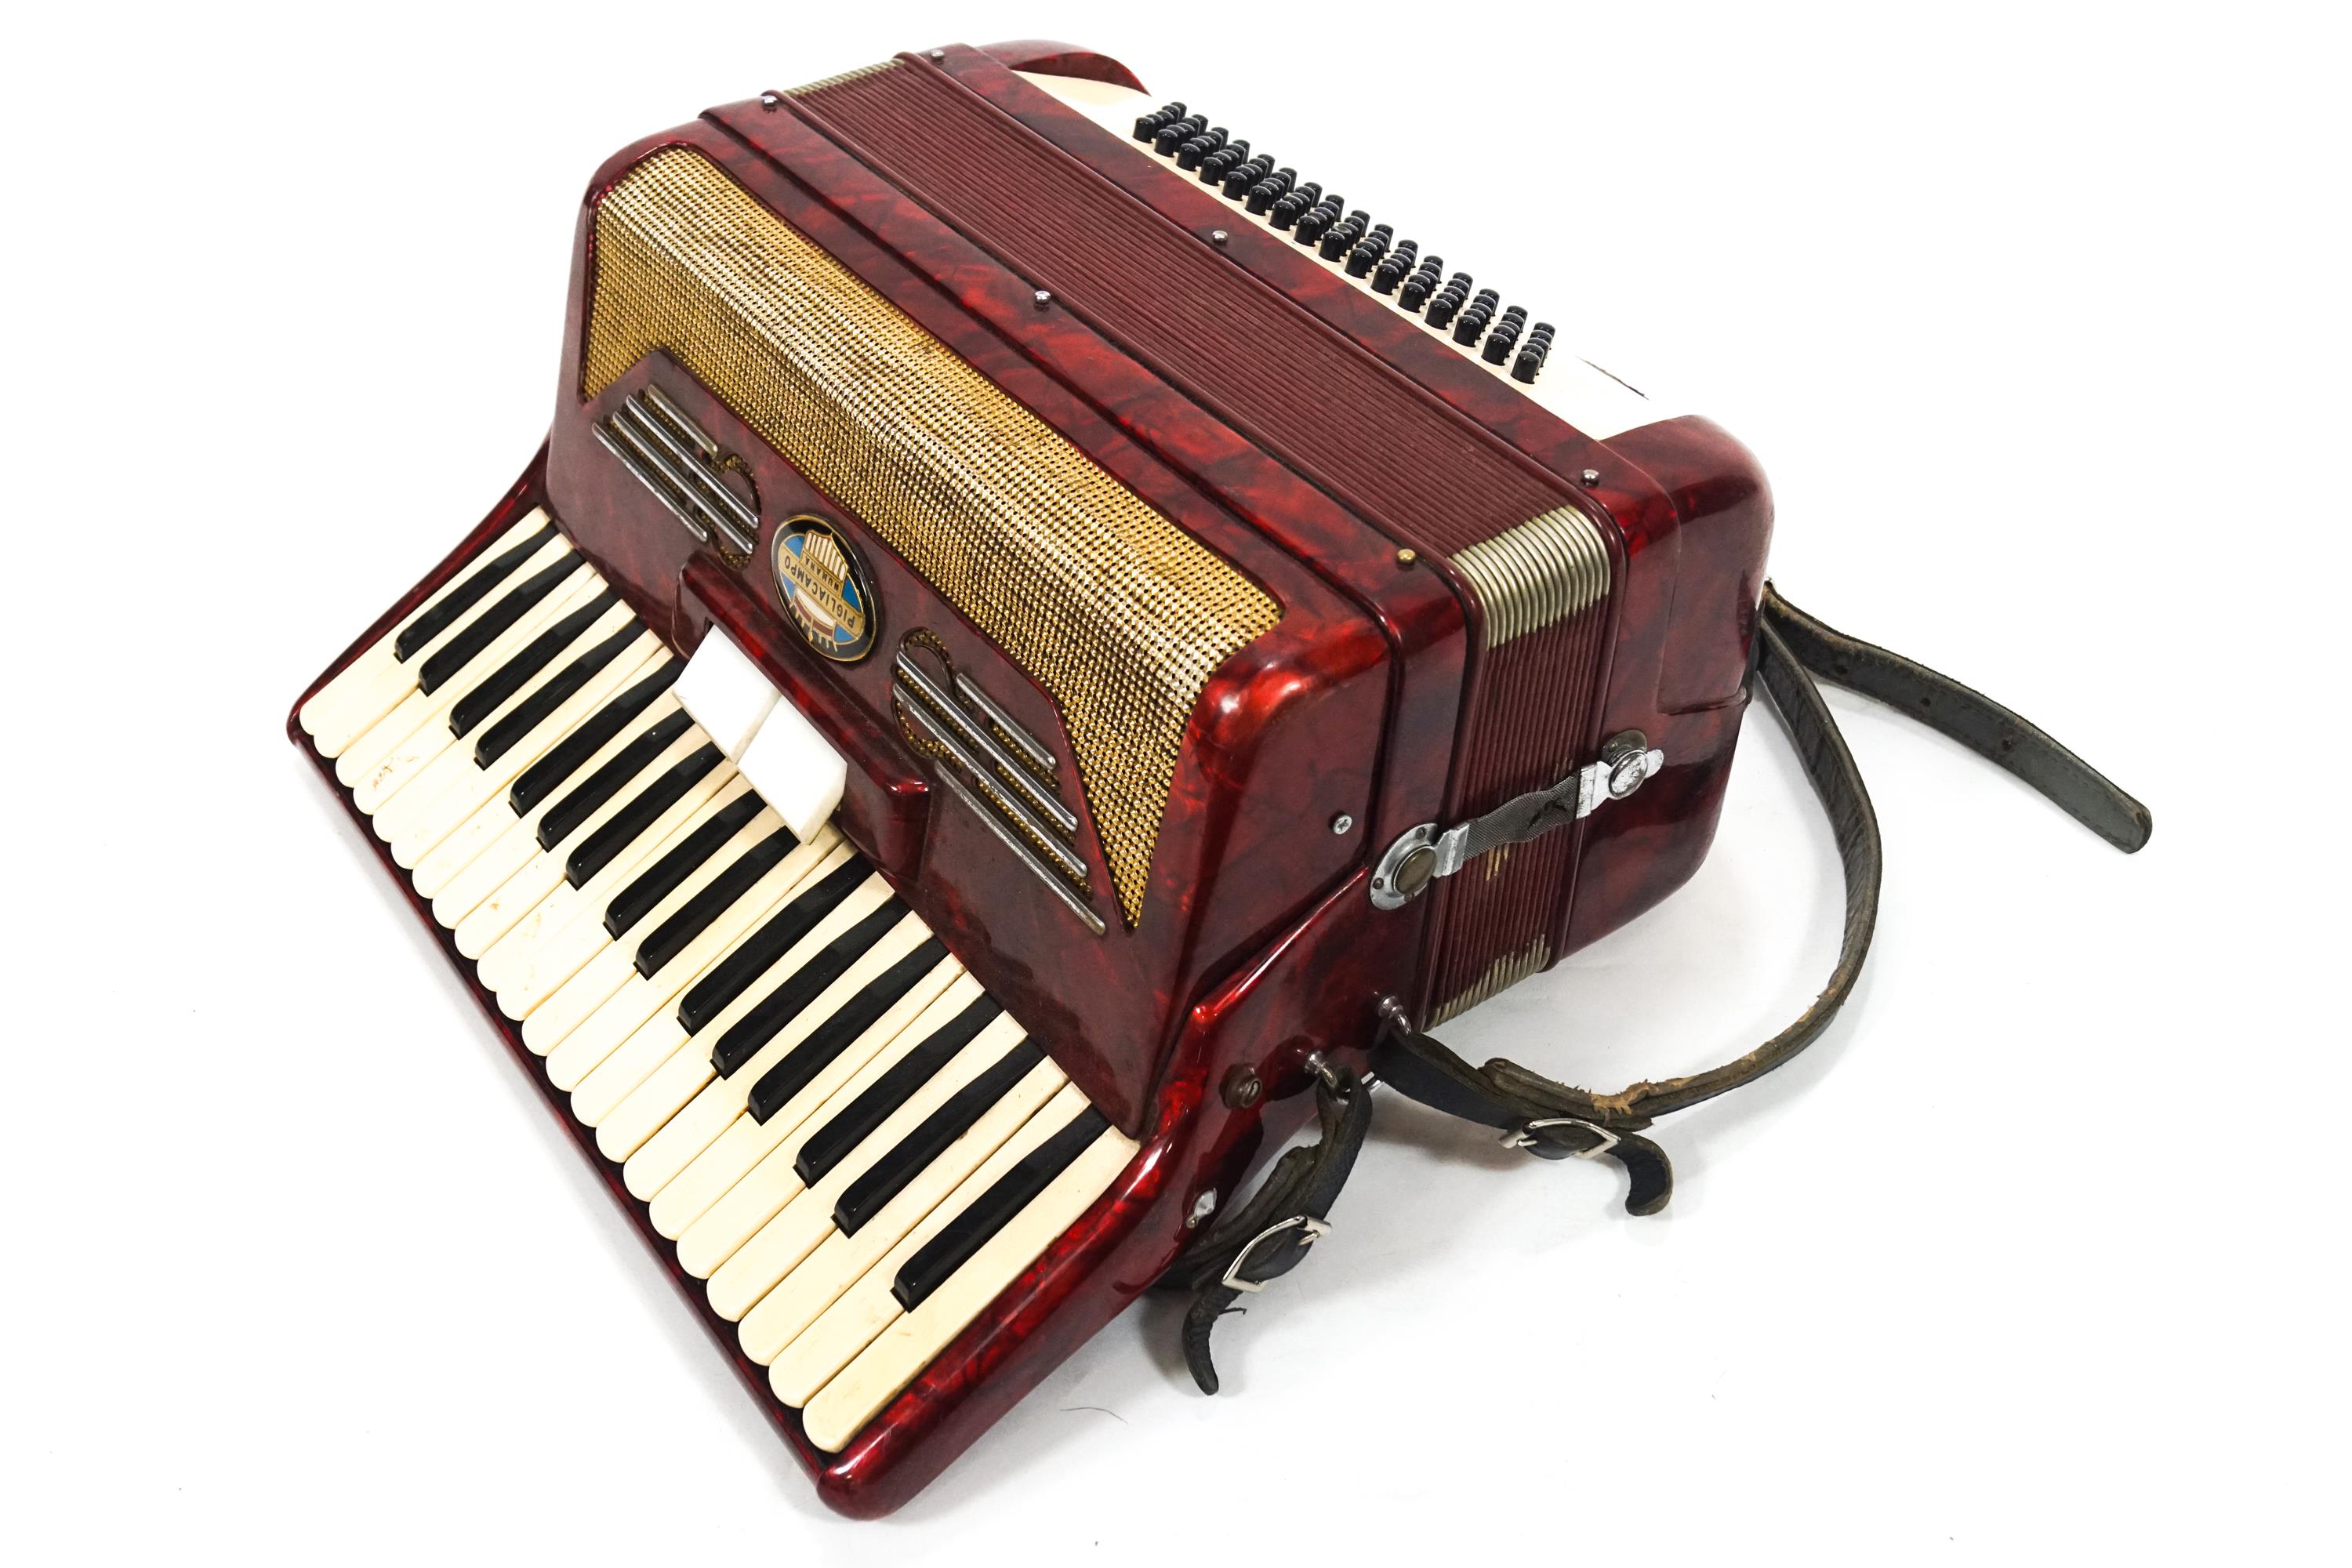 A red Pigliacampo piano accordian, - Image 2 of 2